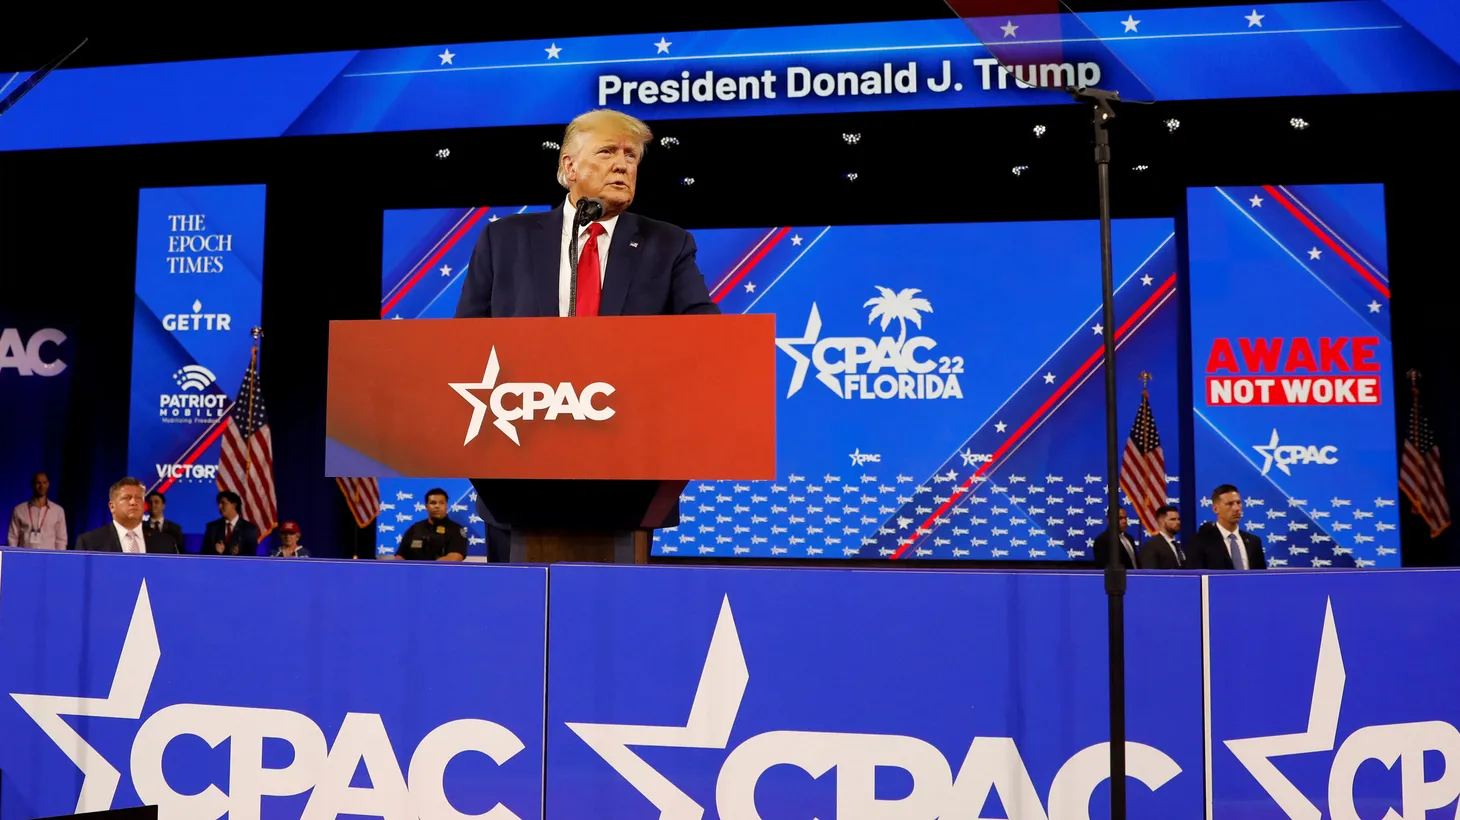 Former U.S. President Donald Trump speaks during the Conservative Political Action Conference (CPAC) in Orlando, Florida, U.S. February 26, 2022.